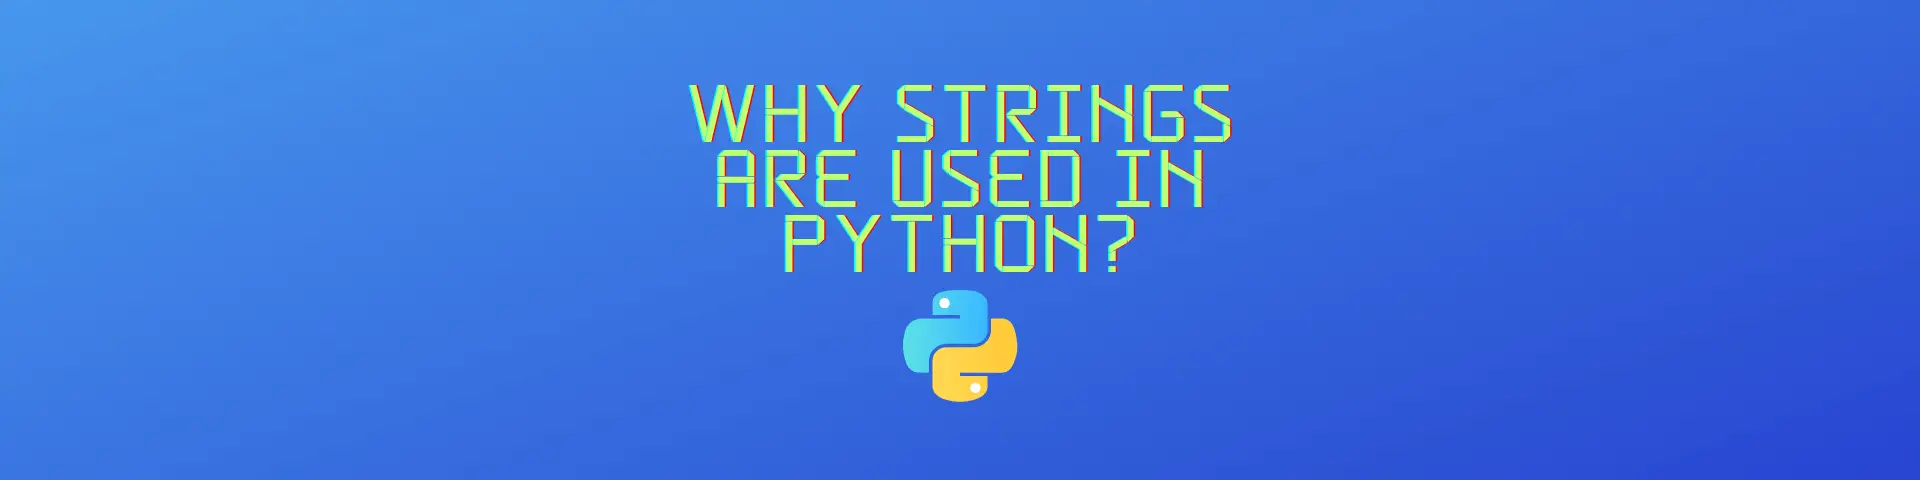 Why strings are used in Python?